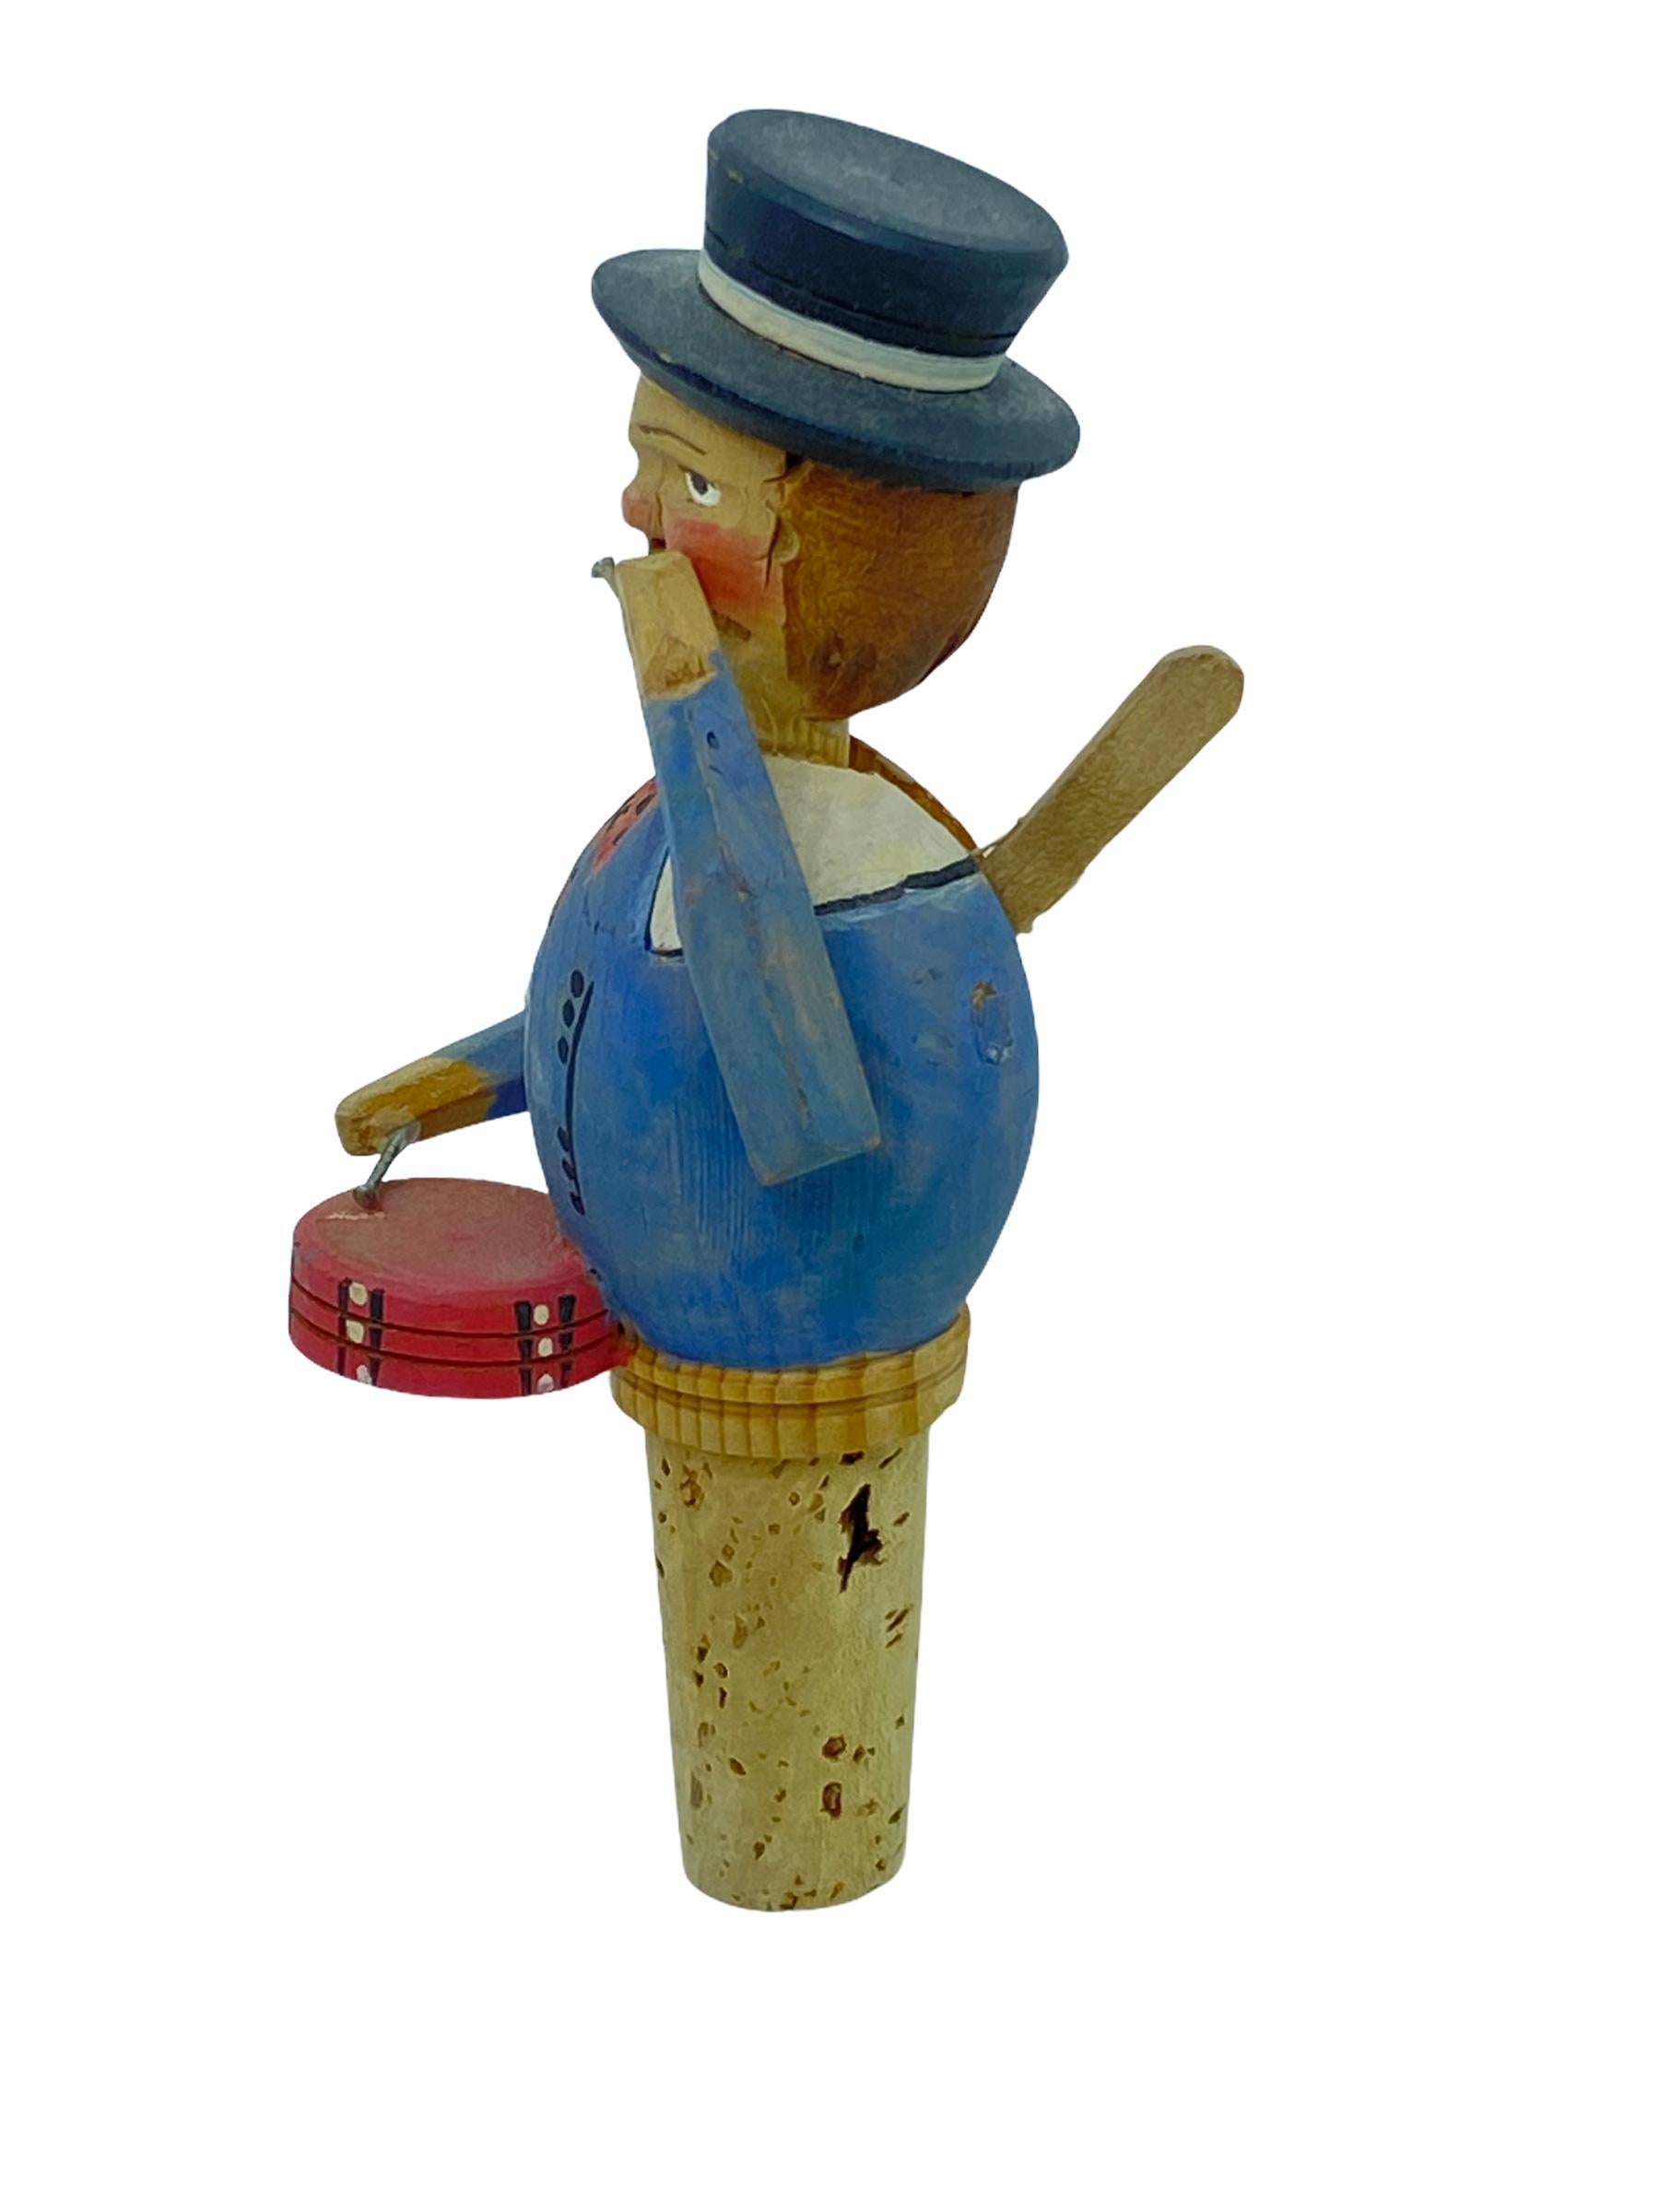 Adorable hand carved and hand painted mechanical bottle stopper. It depicts a lovely Drummer from the 1950s. There is a wooden lever on the back of the Drummer and when it is pulled down, the Man beat the drum. A nice addition to any collection or